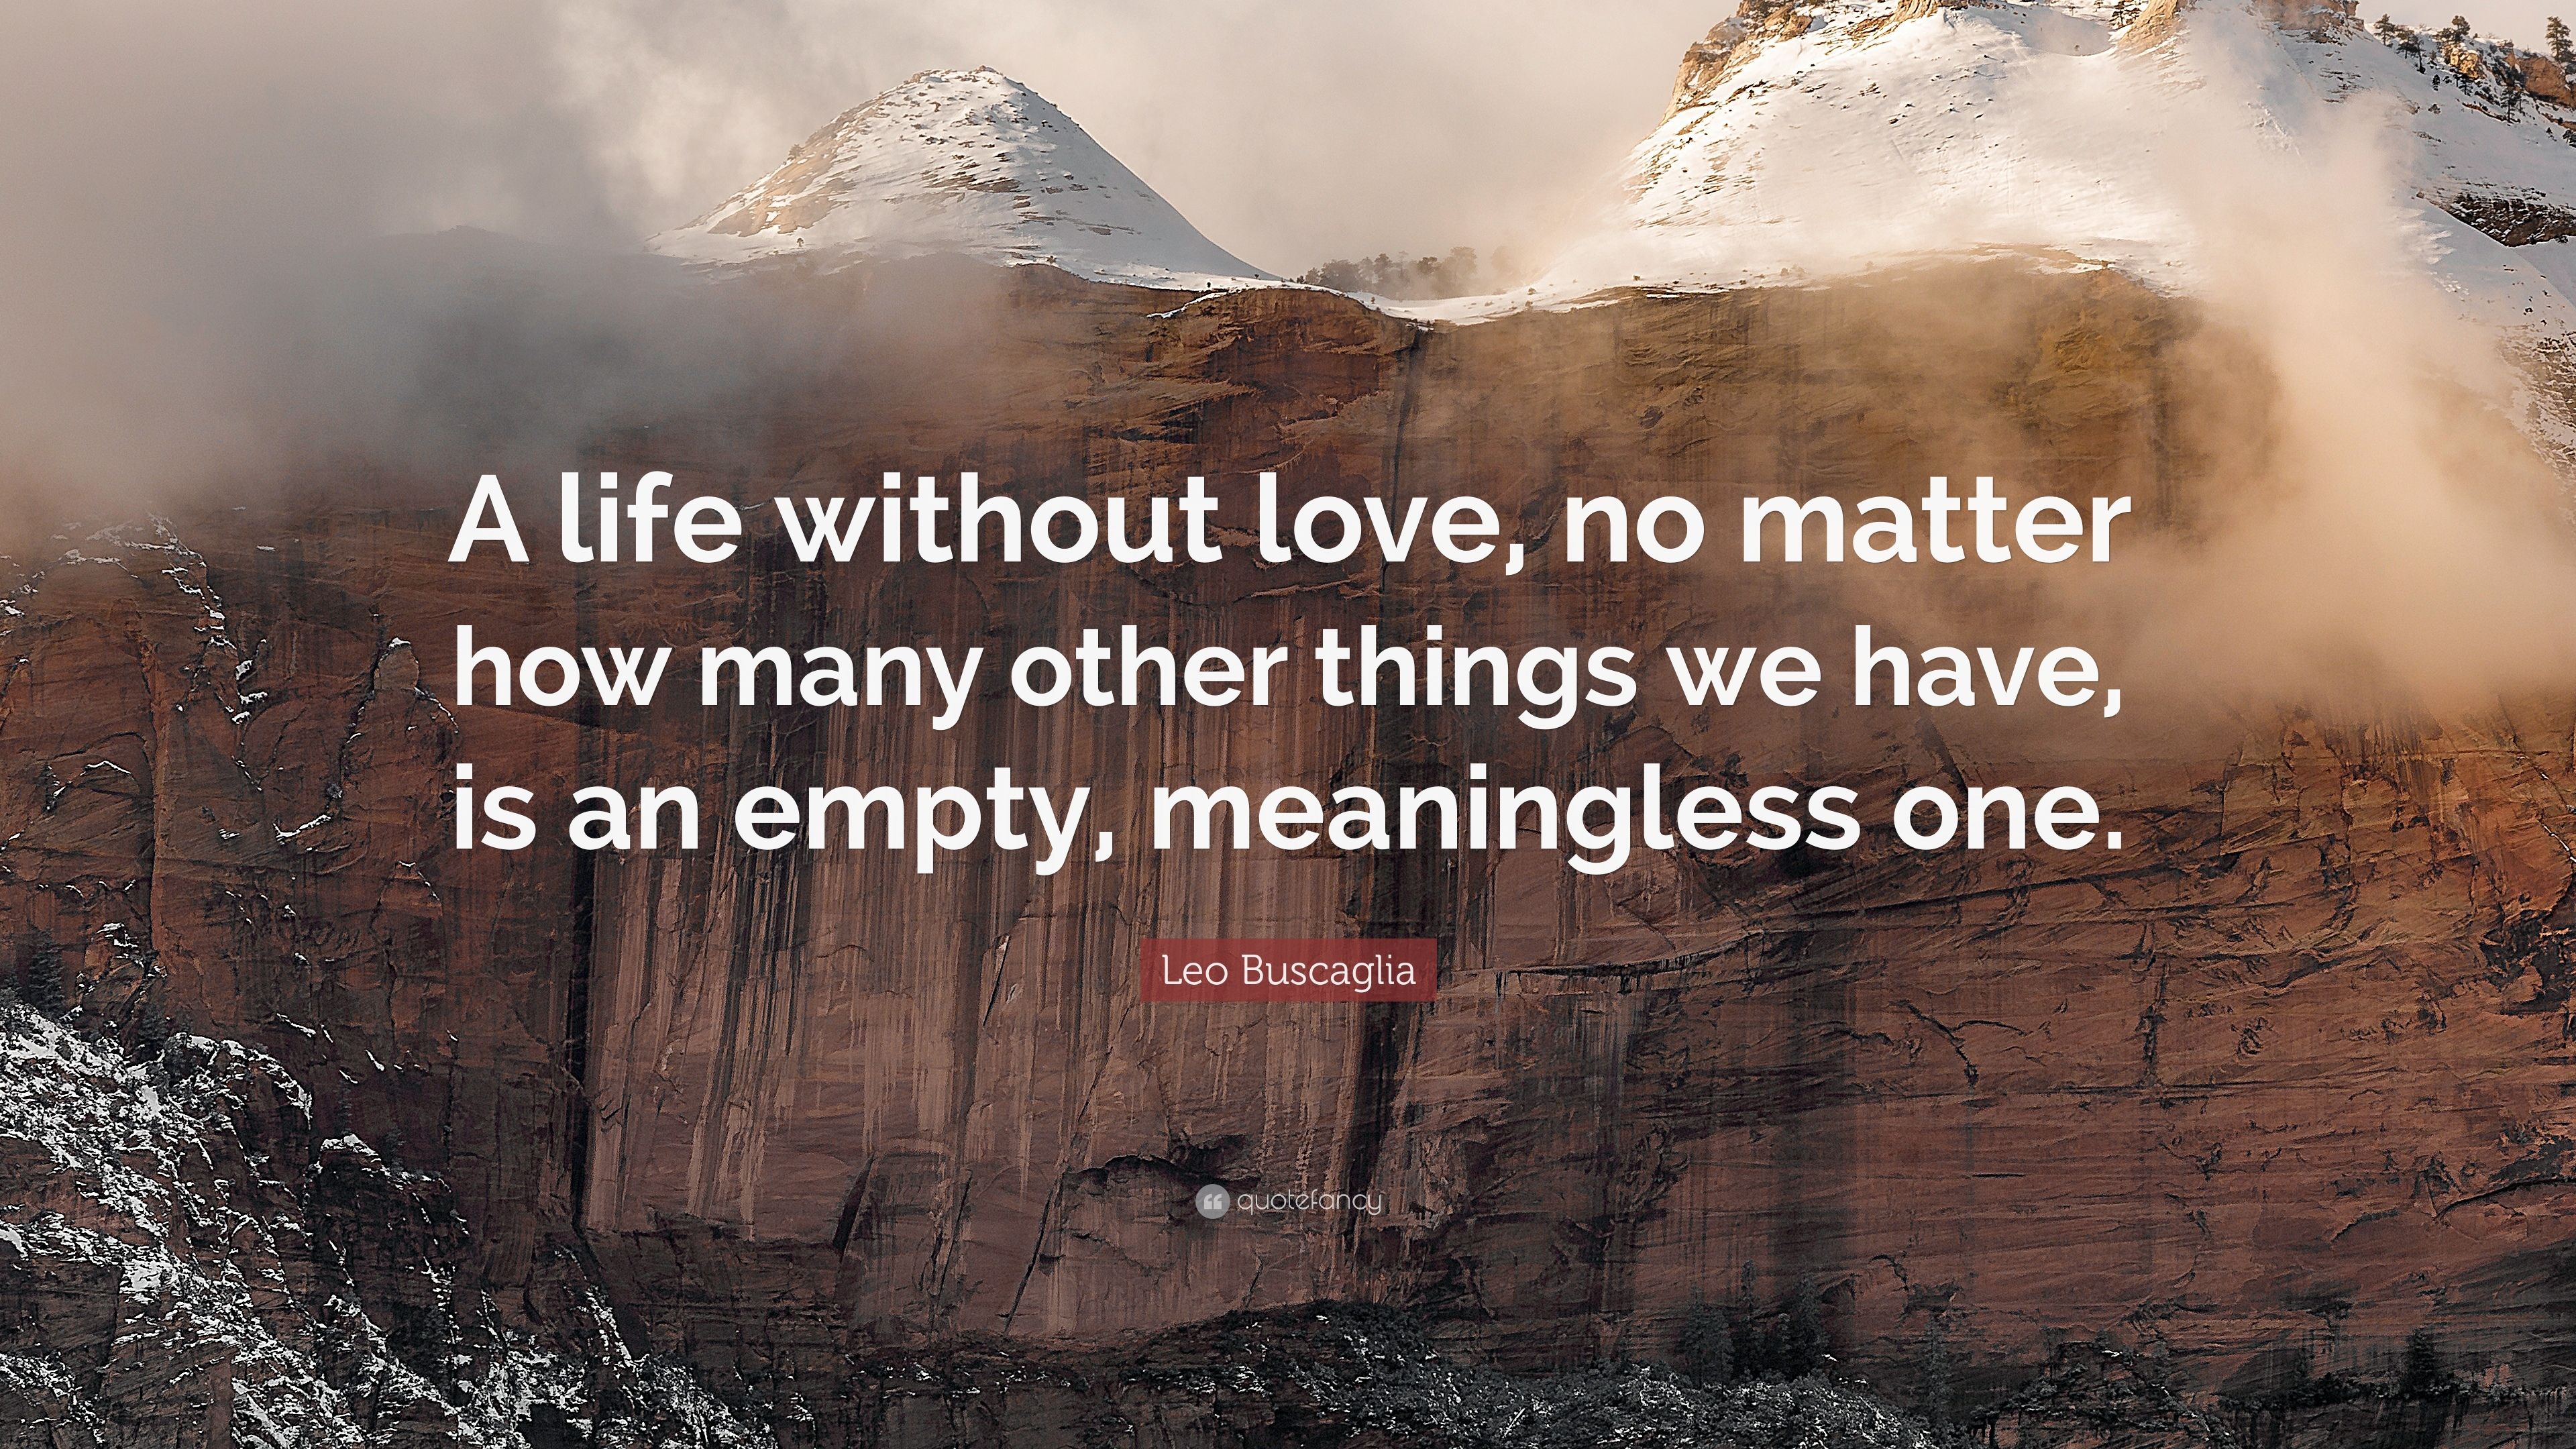 Leo Buscaglia Quote: “A life without love, no matter how many other